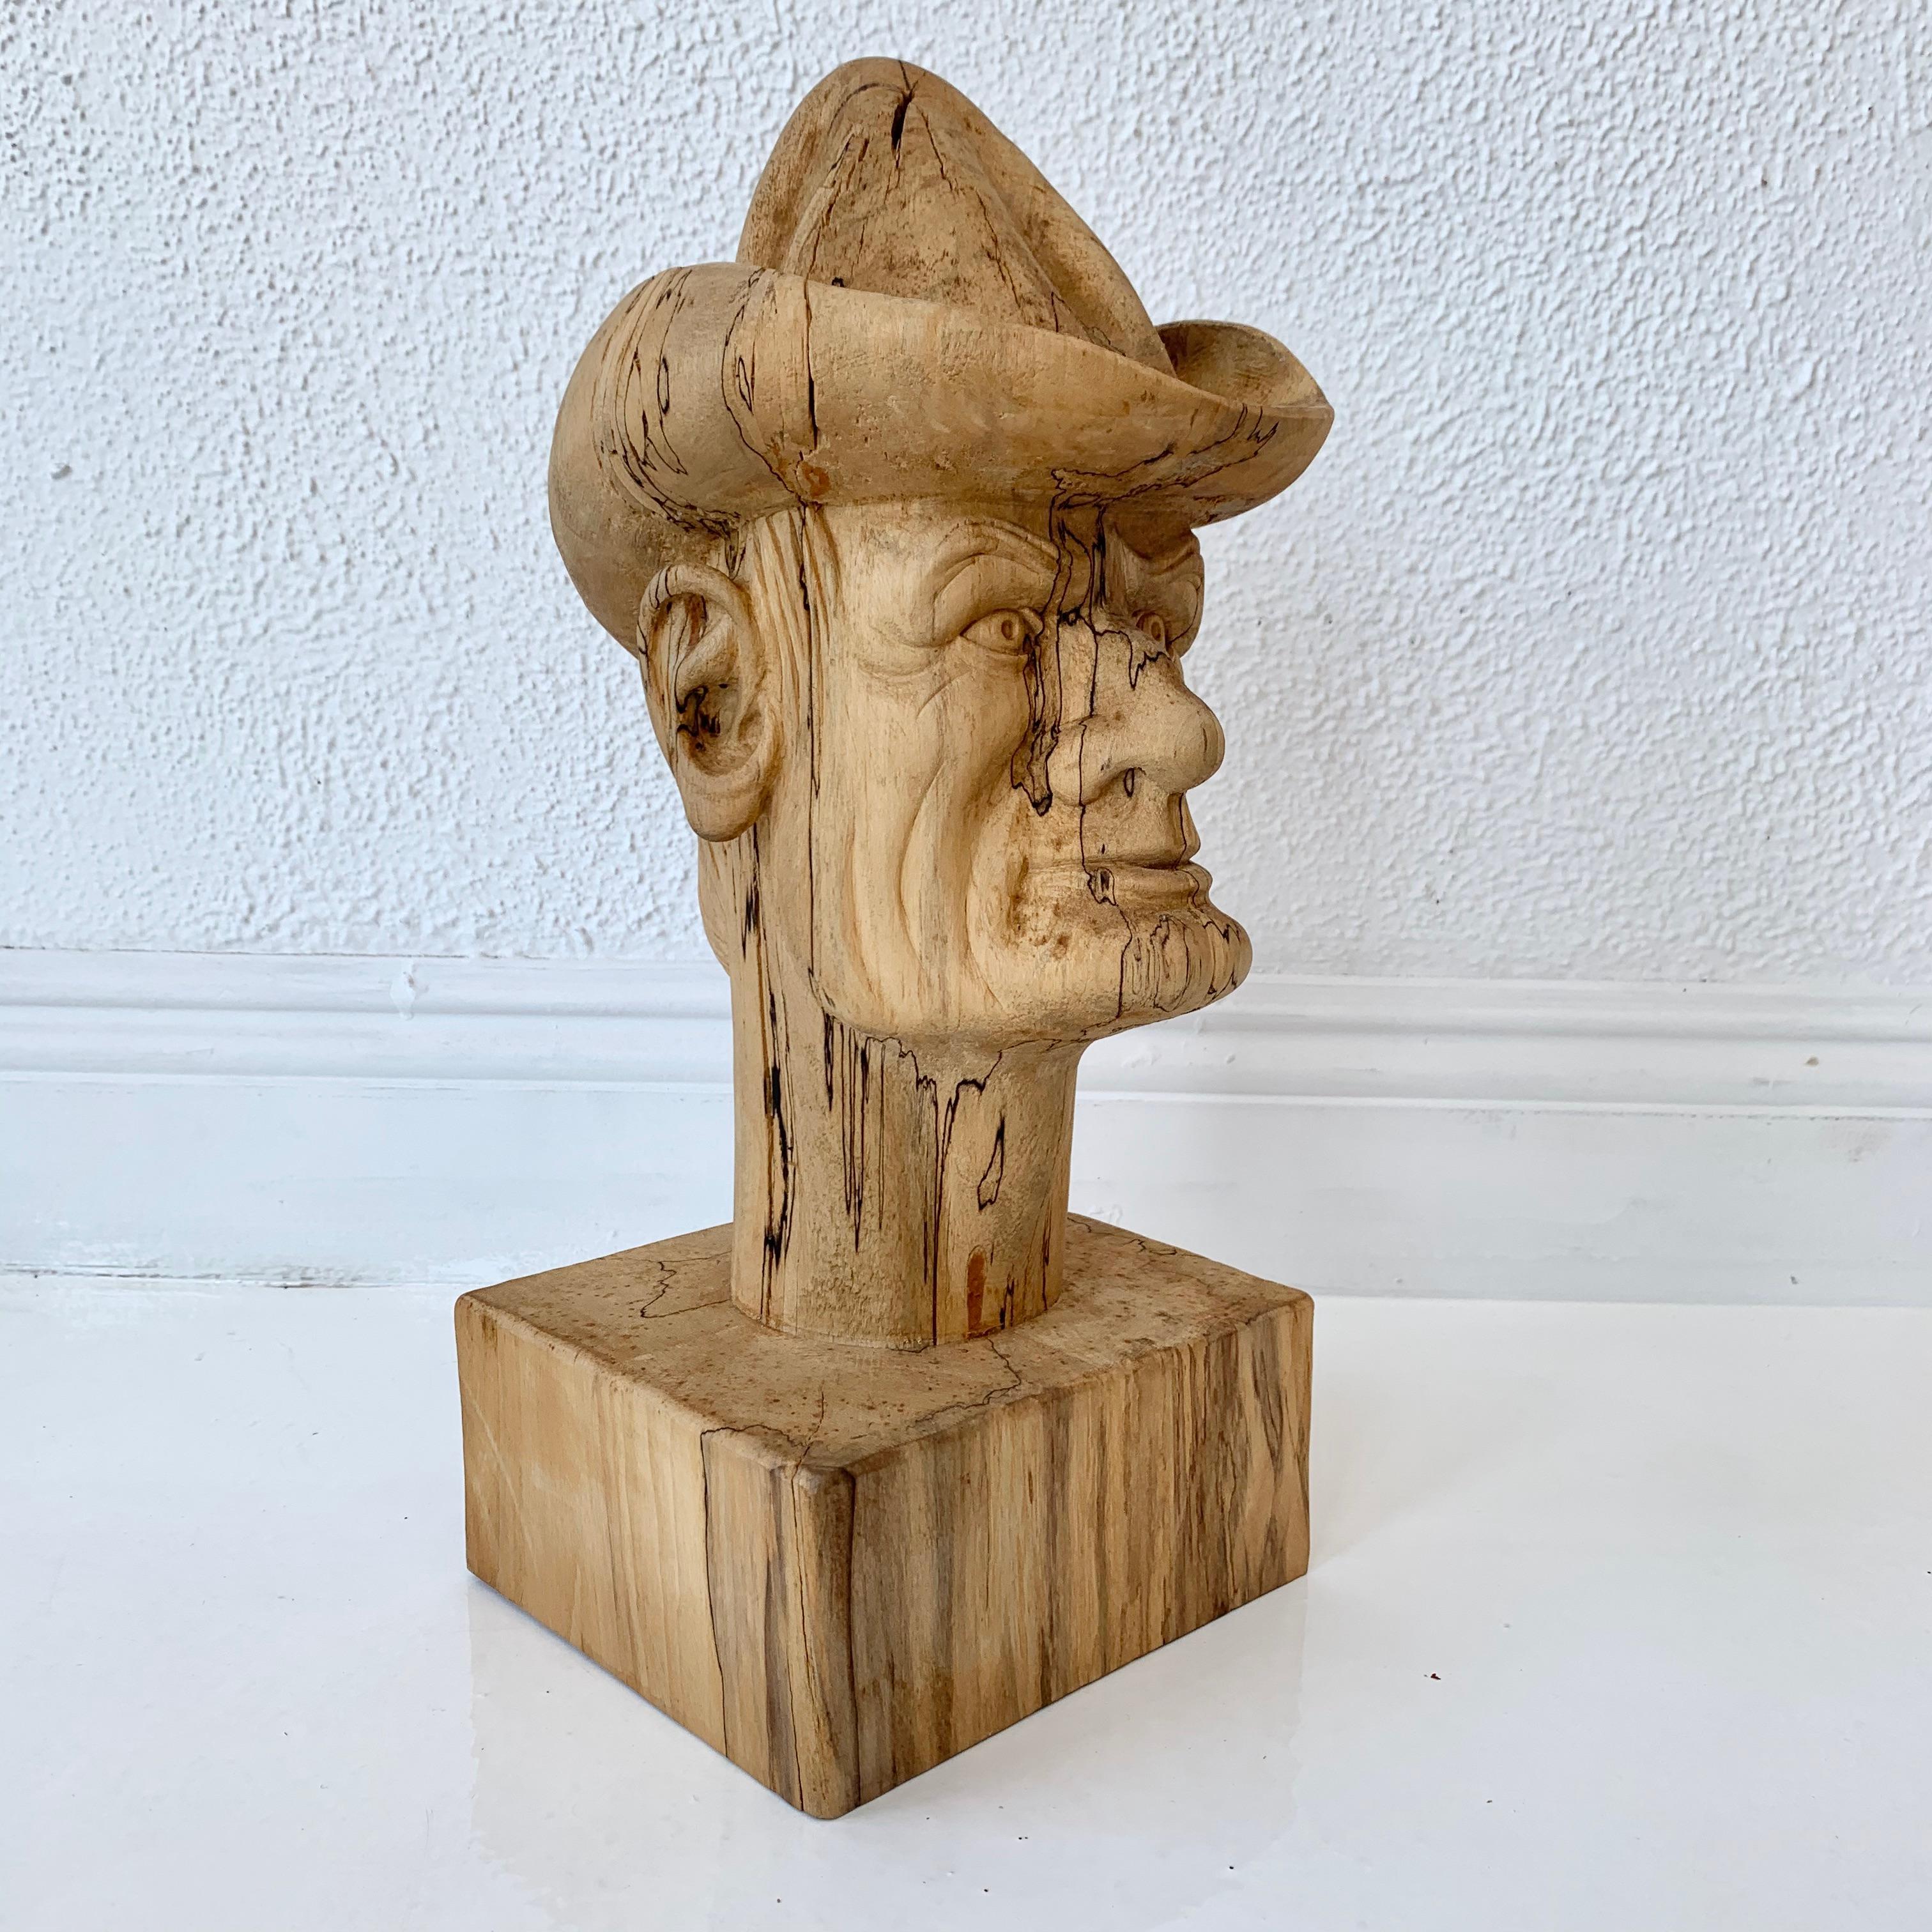 Hand carved wood cowboy bust. Excellent workmanship and detail. An ominous face. Slightly scary appearance. Very well done. Signed N Weisman.